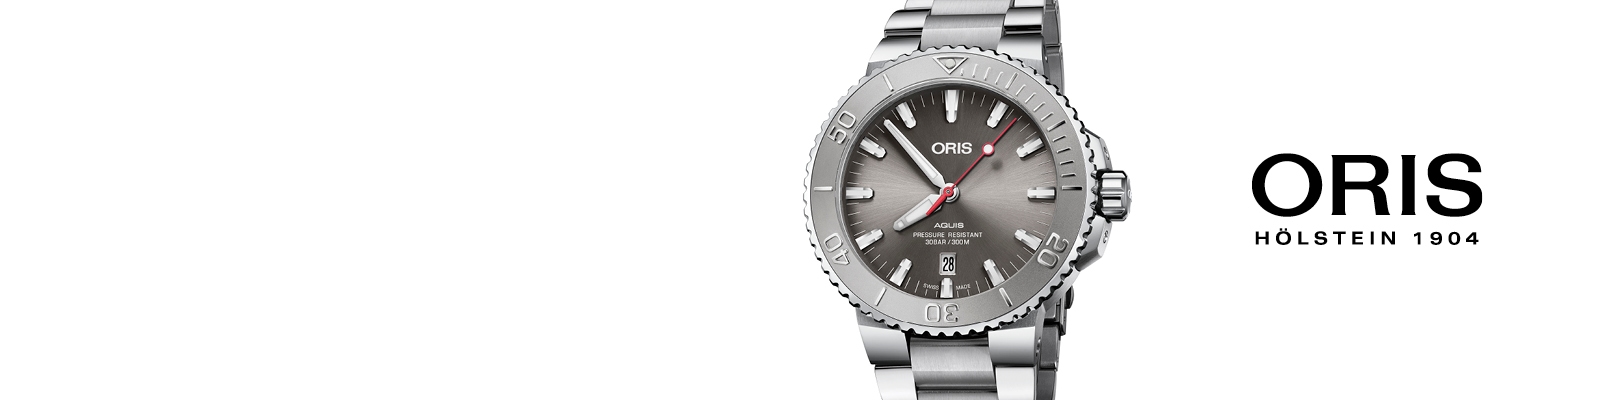 Shop all Oris Dive watches at Jared.